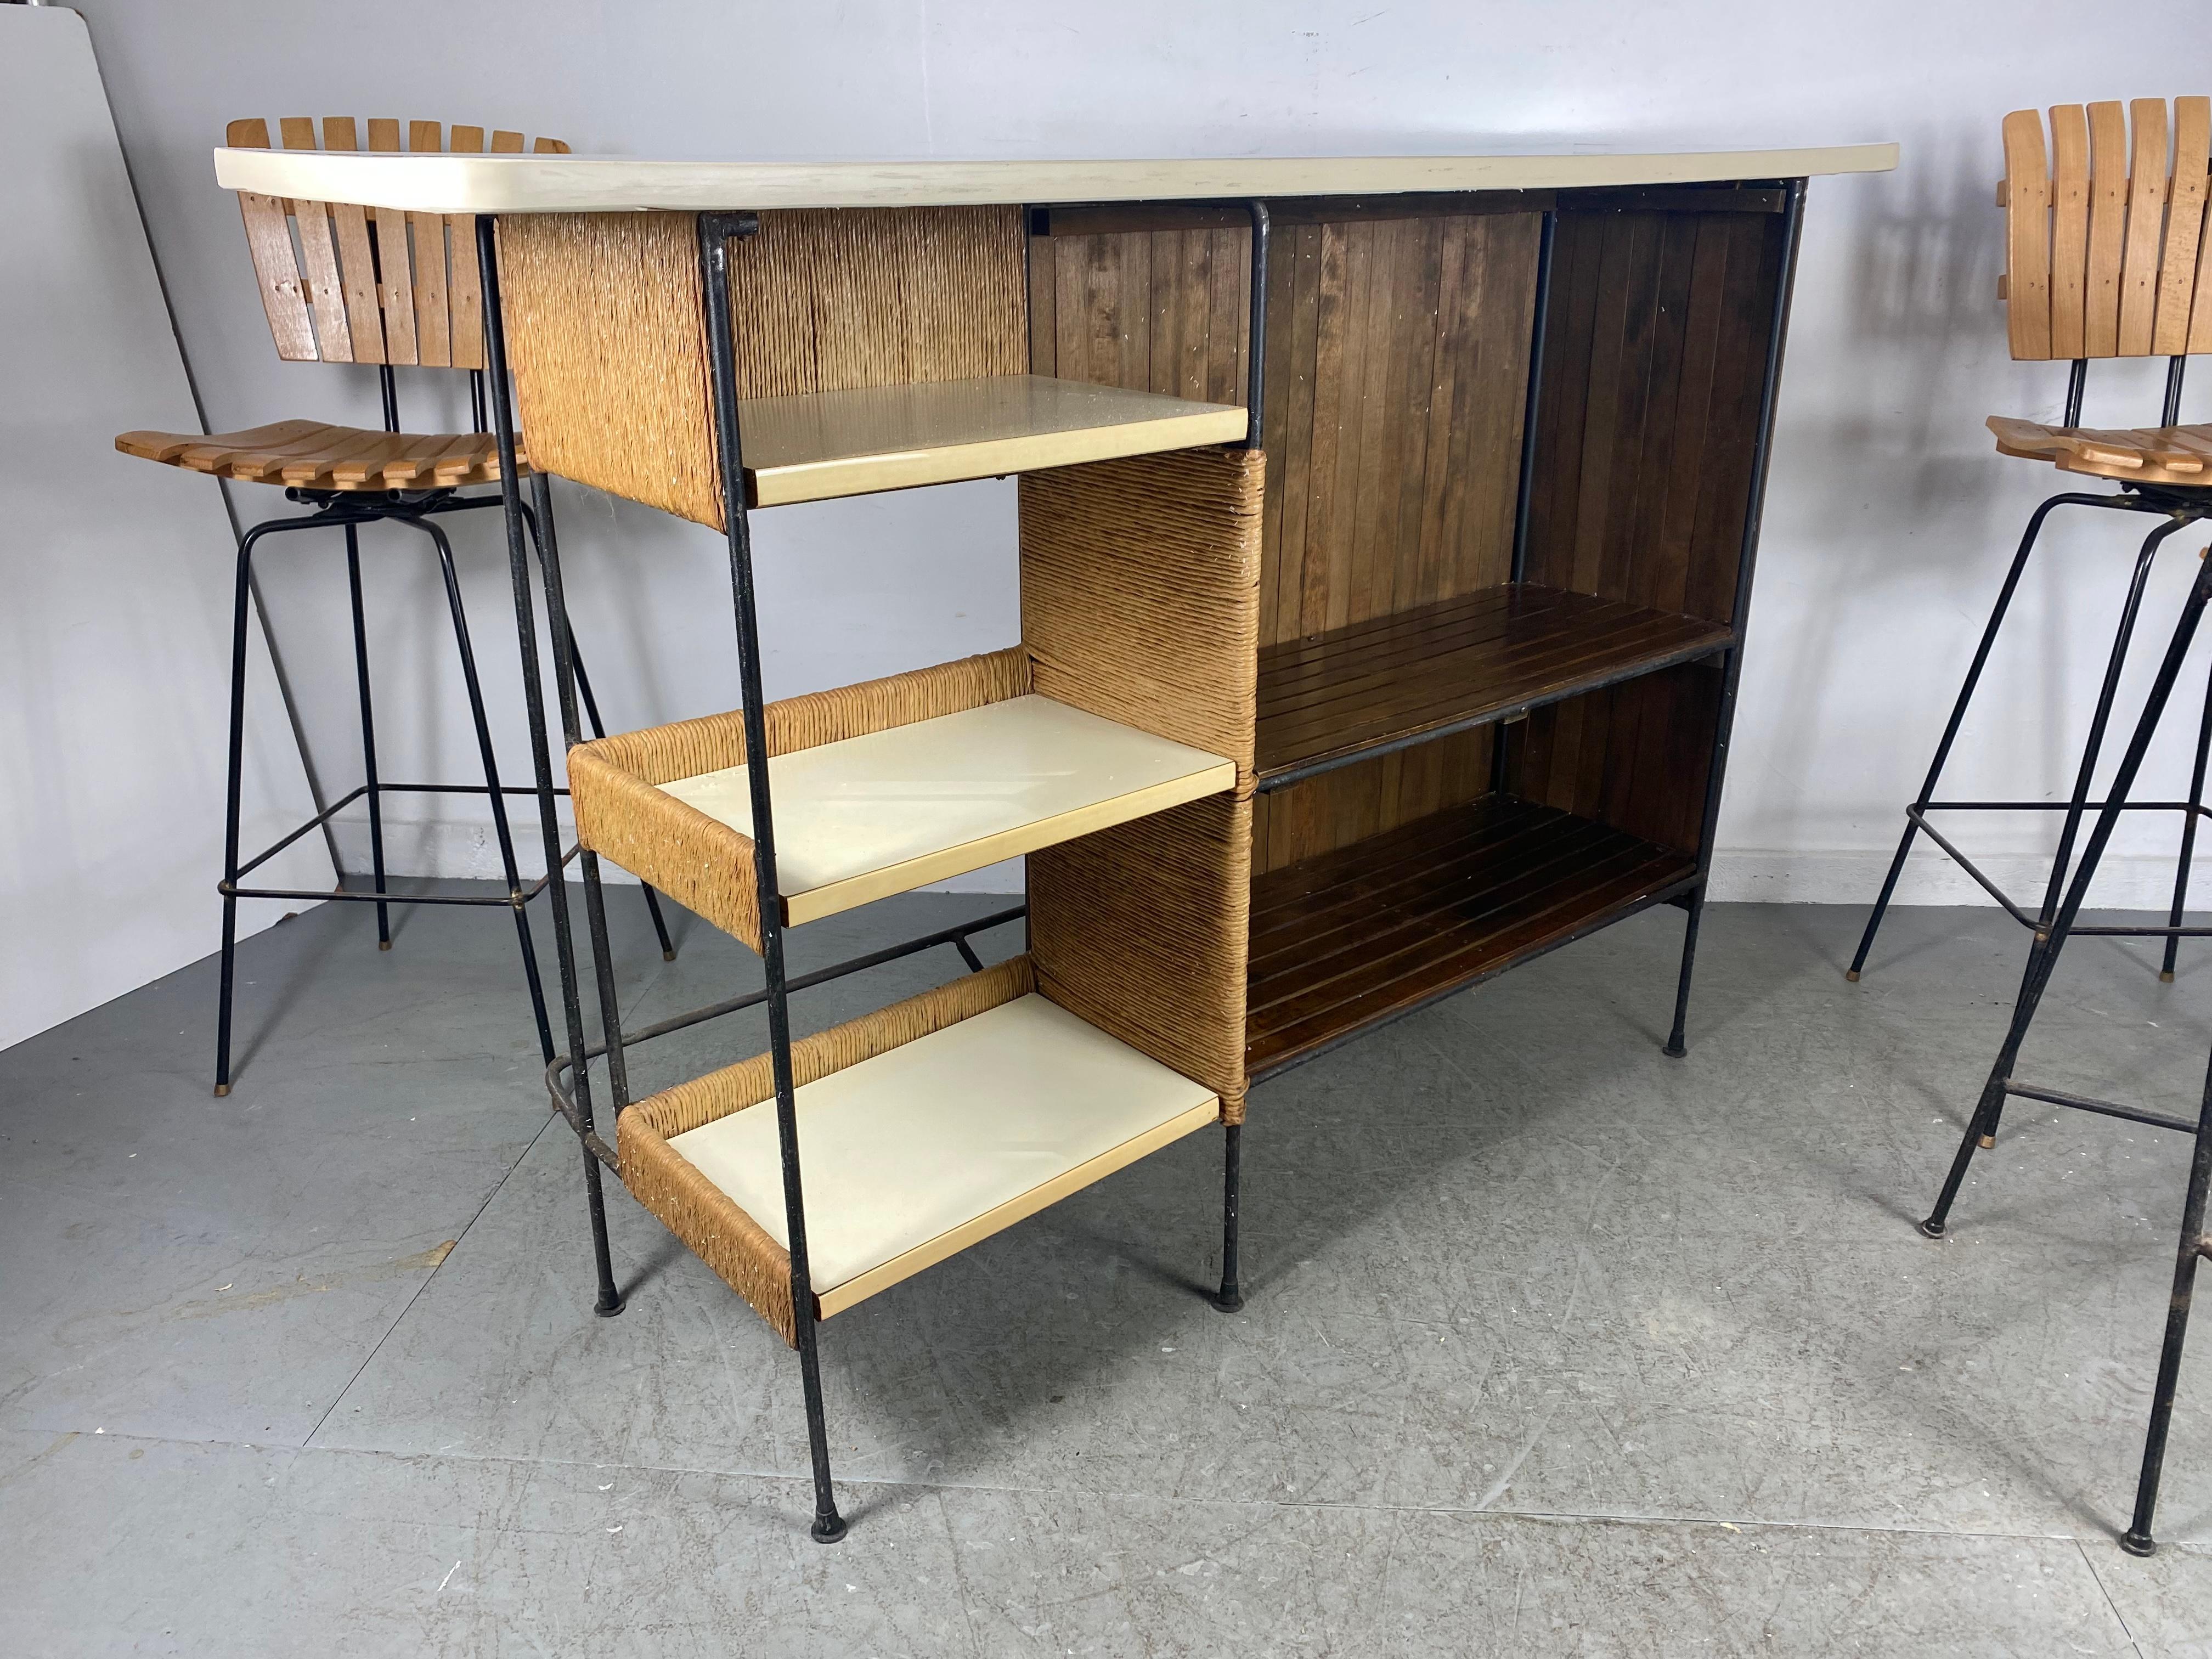 Unusual ,,seldom seen,, Home Bar with (1) matching stool designed by Arthur Umanoff. Please note. (2) slat wood stools pictured are not included ! This version rarely shows up on the market, Classic modernist design. Heavy iron frame, slatted wood